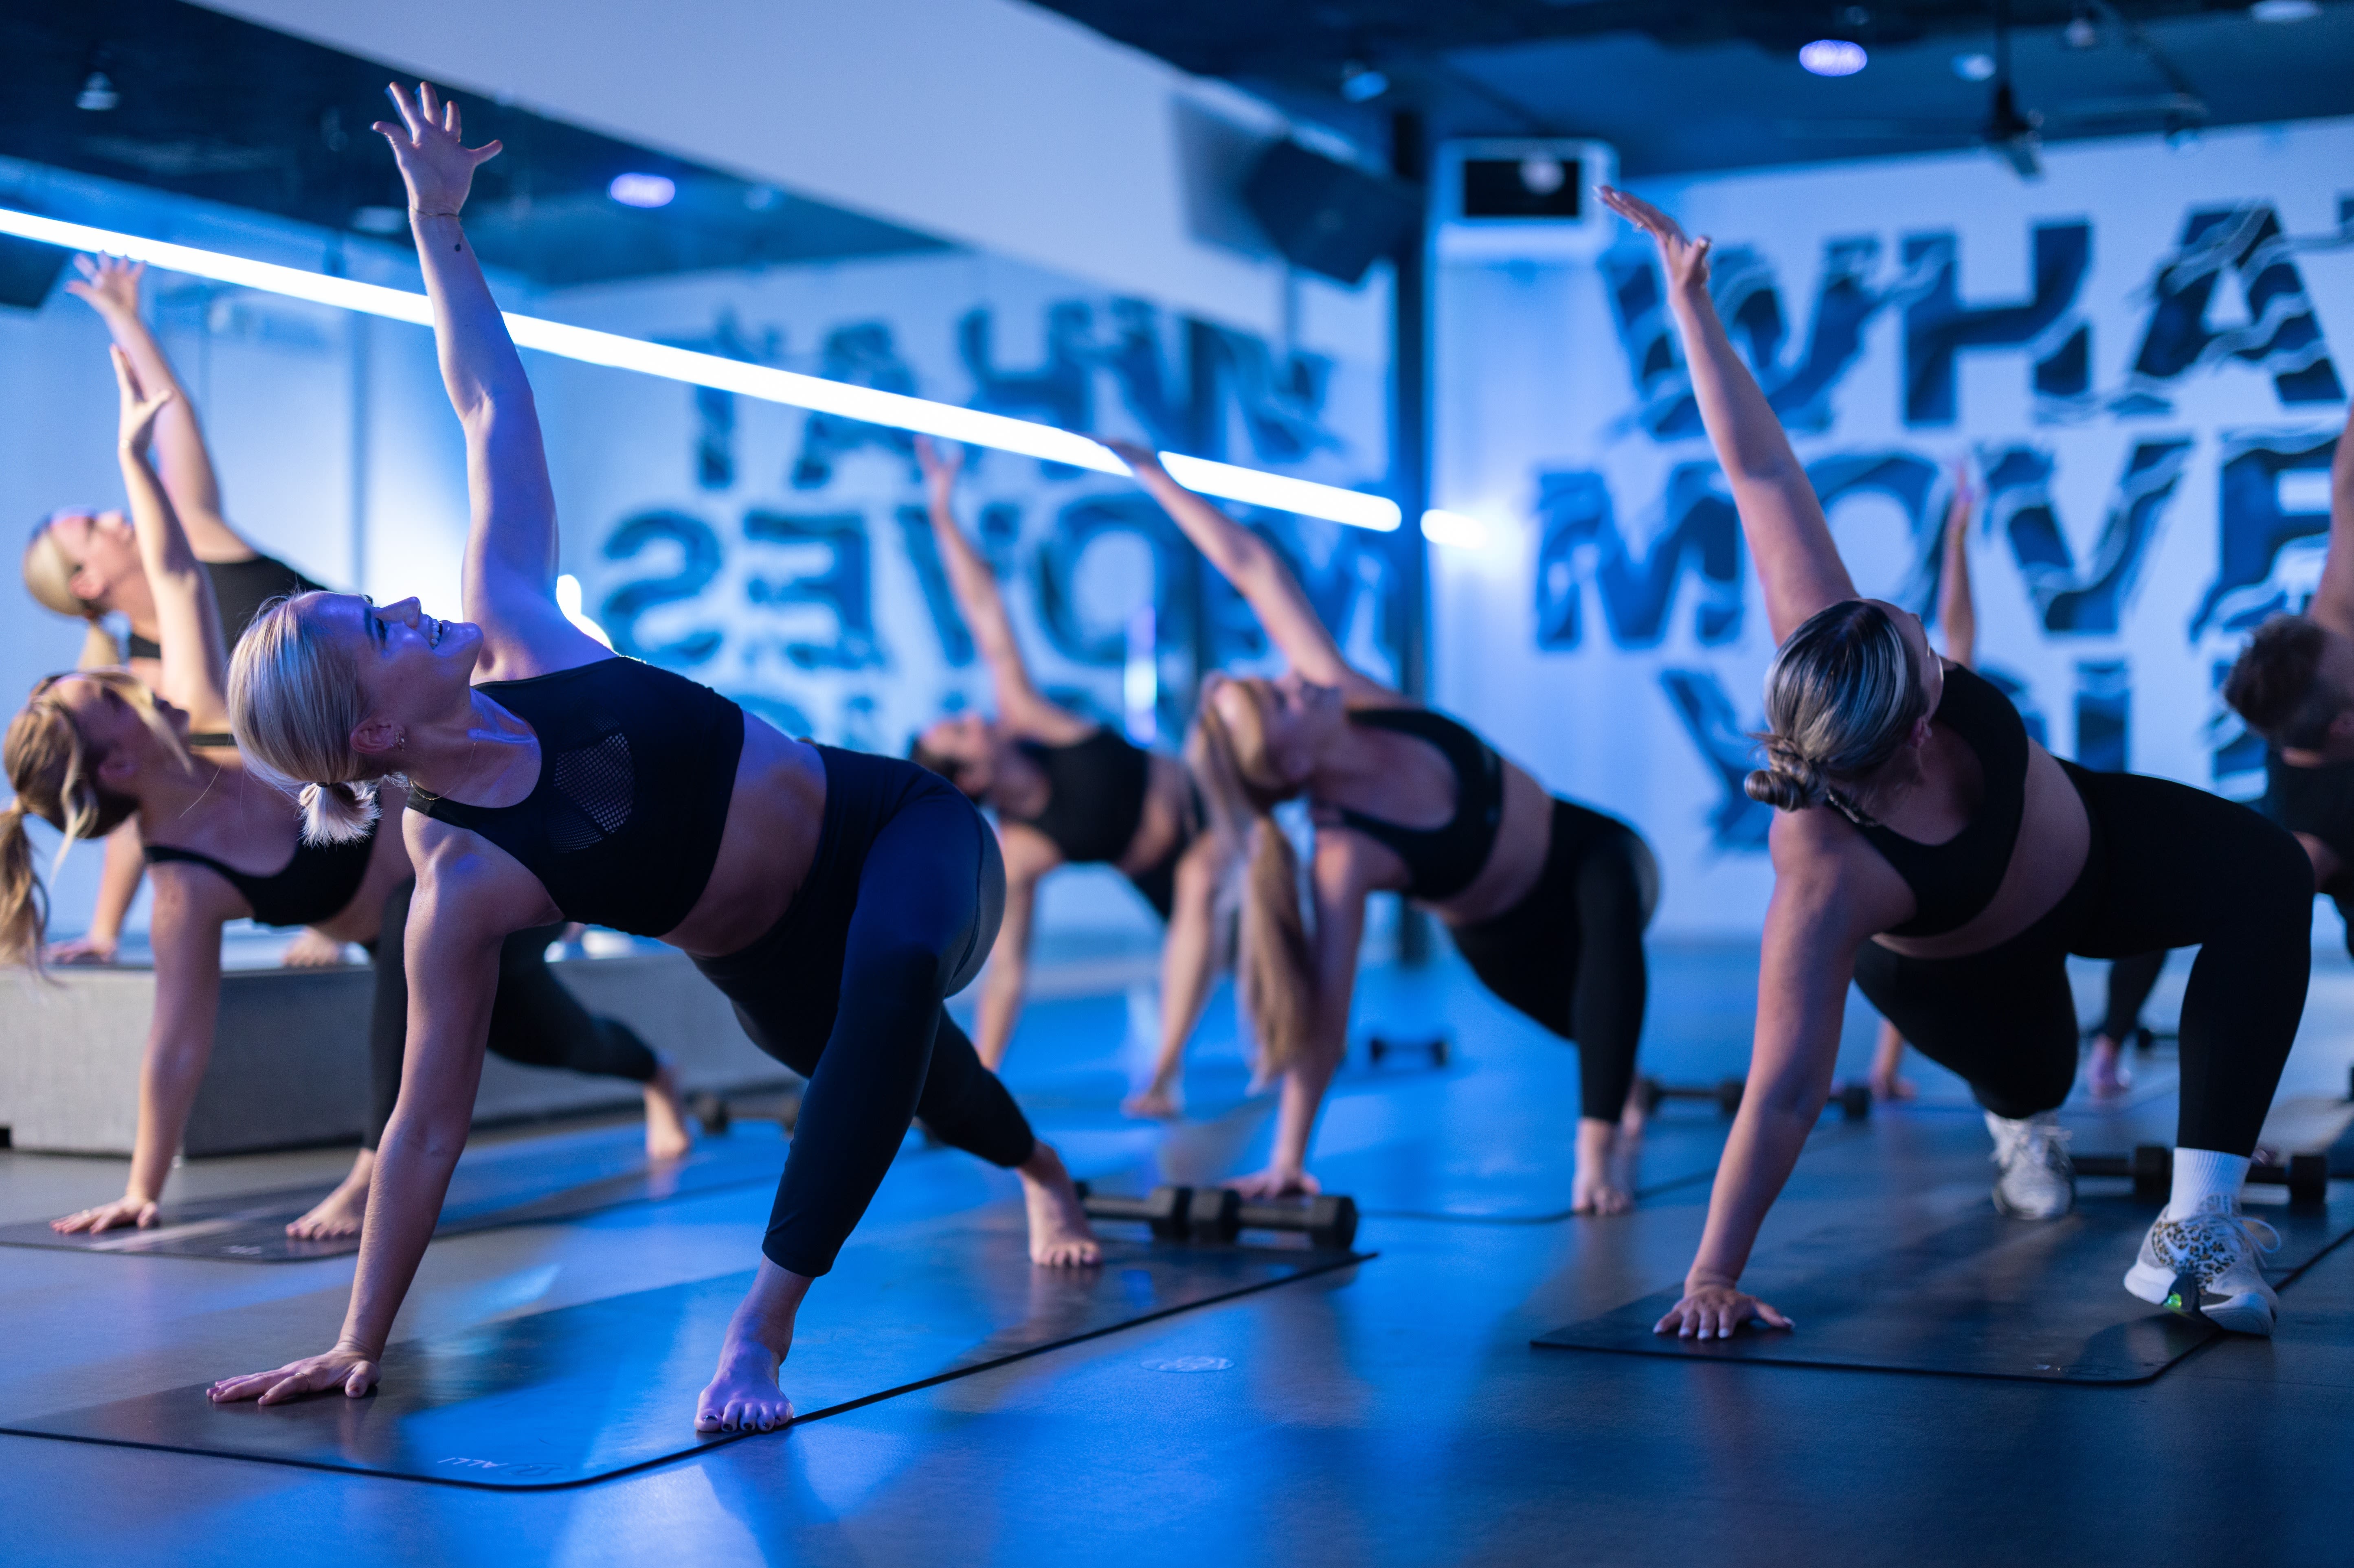 Pop Fit Studio: Read Reviews and Book Classes on ClassPass